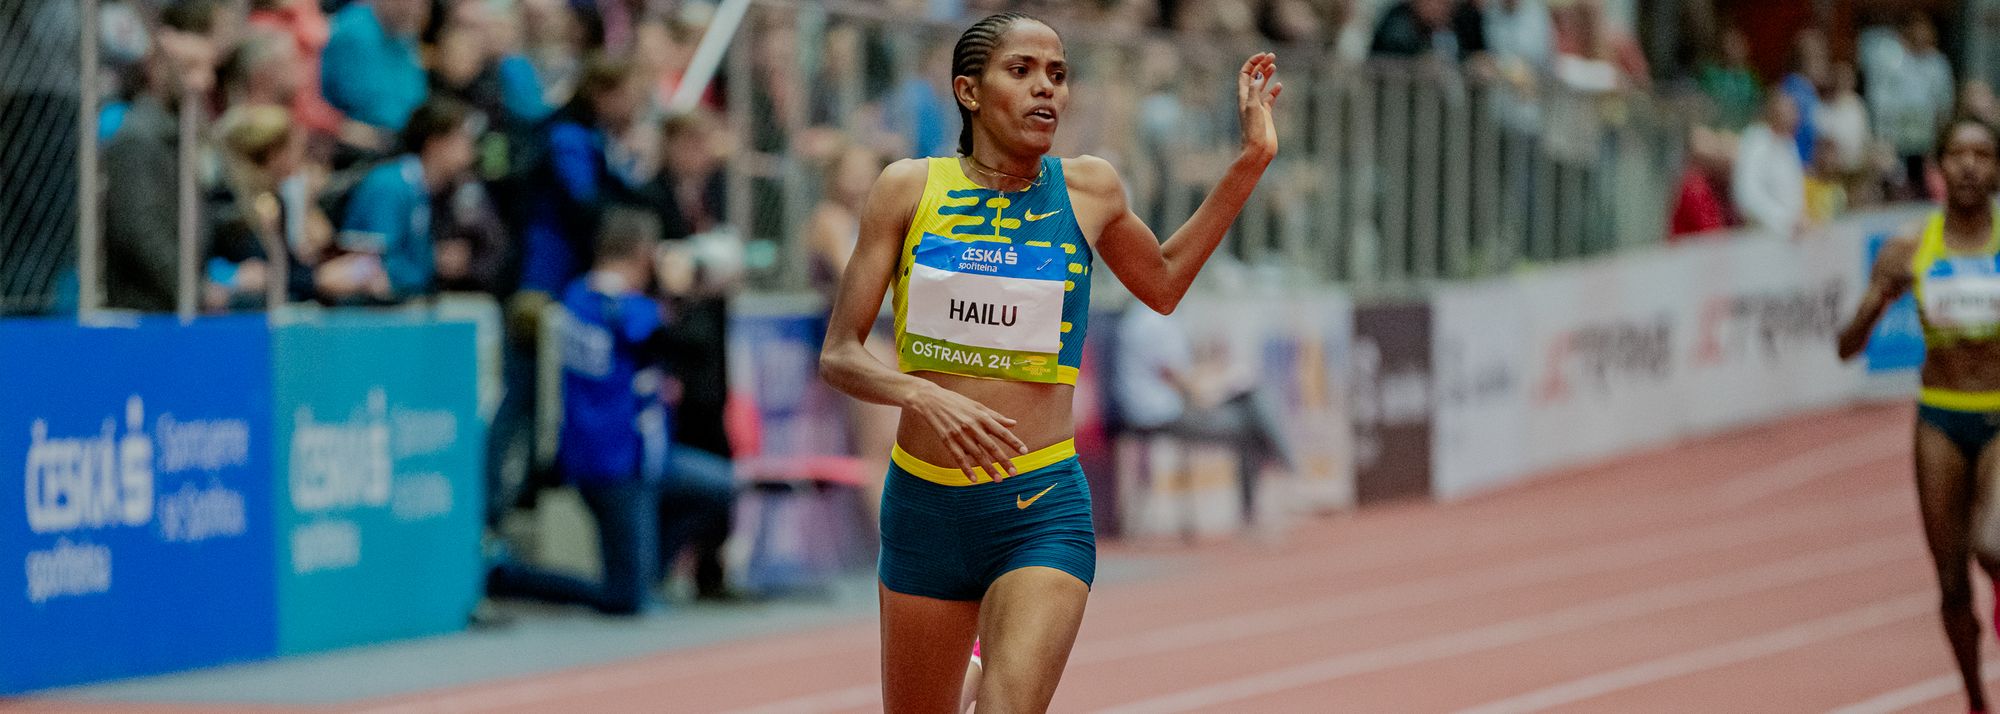 Freweyni Hailu stormed to sixth on the women’s mile short track all-time list while Lieke Klaver, Isaac Nader and Ewa Swoboda were among the meeting record-breakers at the Czech Indoor Gala